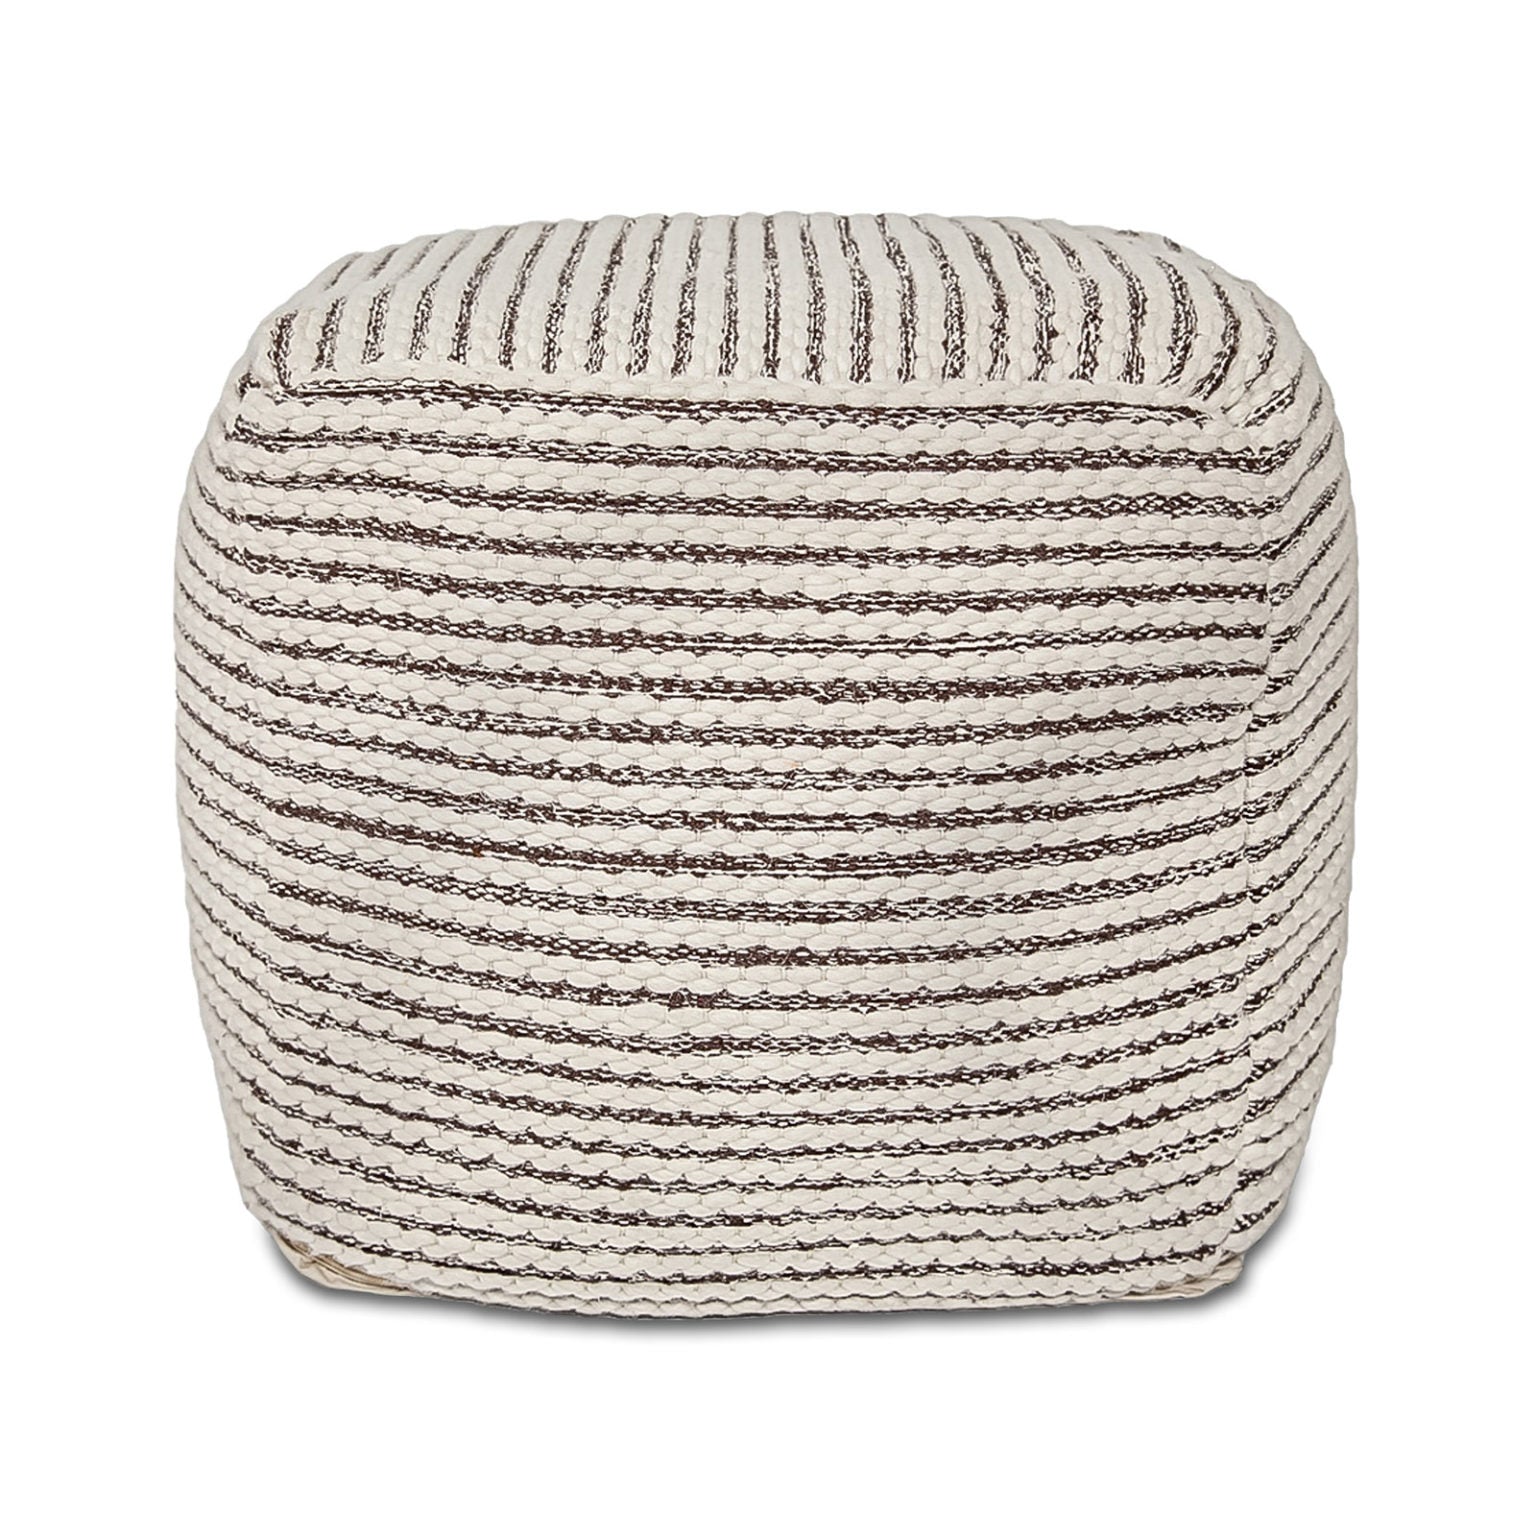 Woven Striped Pouf - Rug & Weave